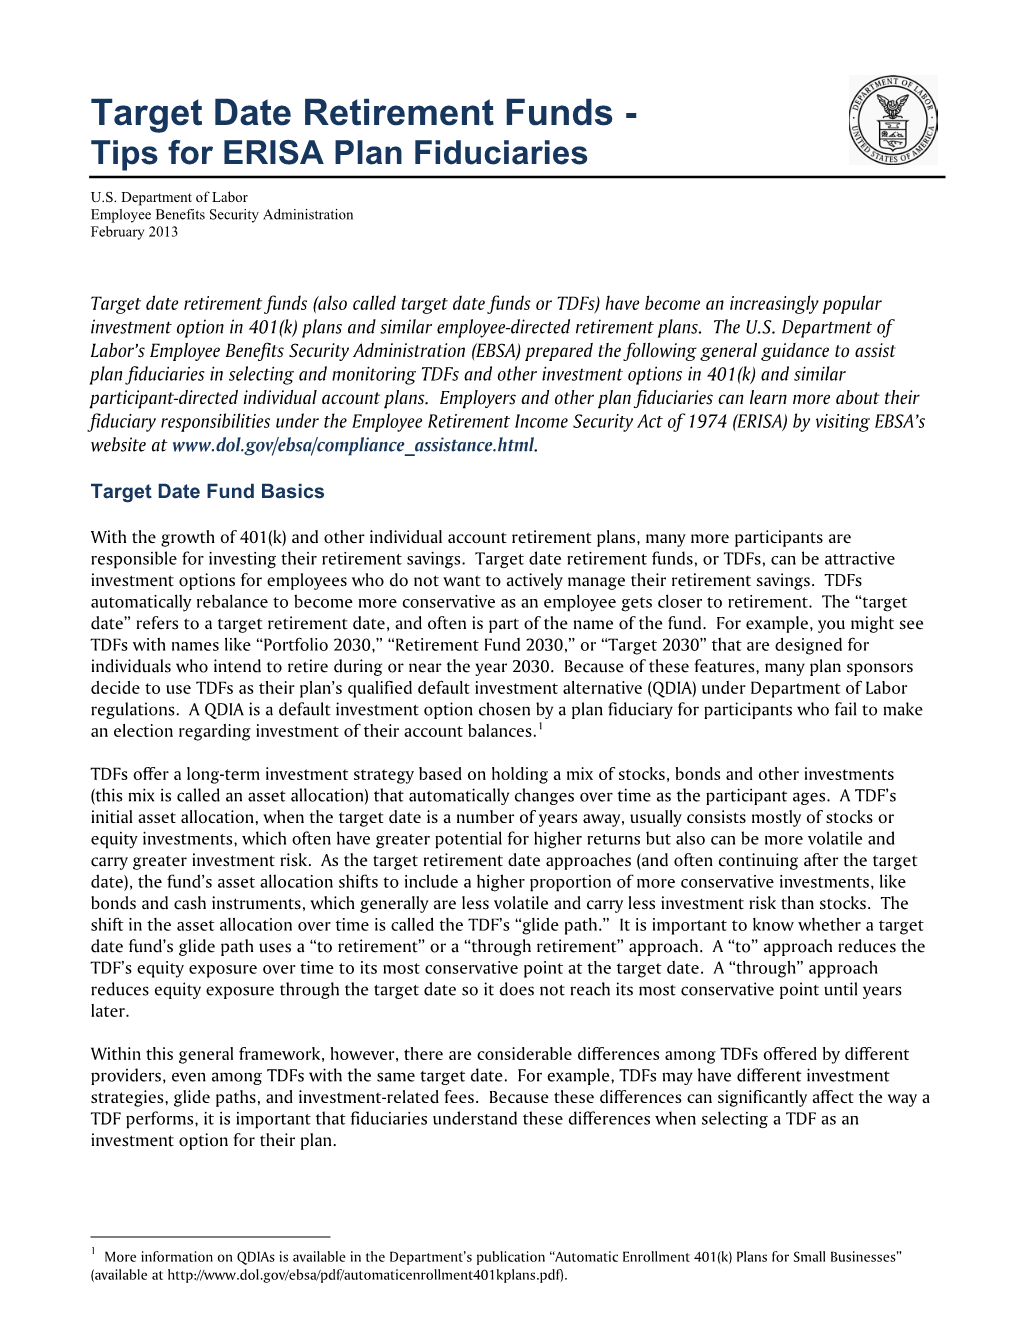 Target Date Retirement Funds - Tips for ERISA Plan Fiduciaries